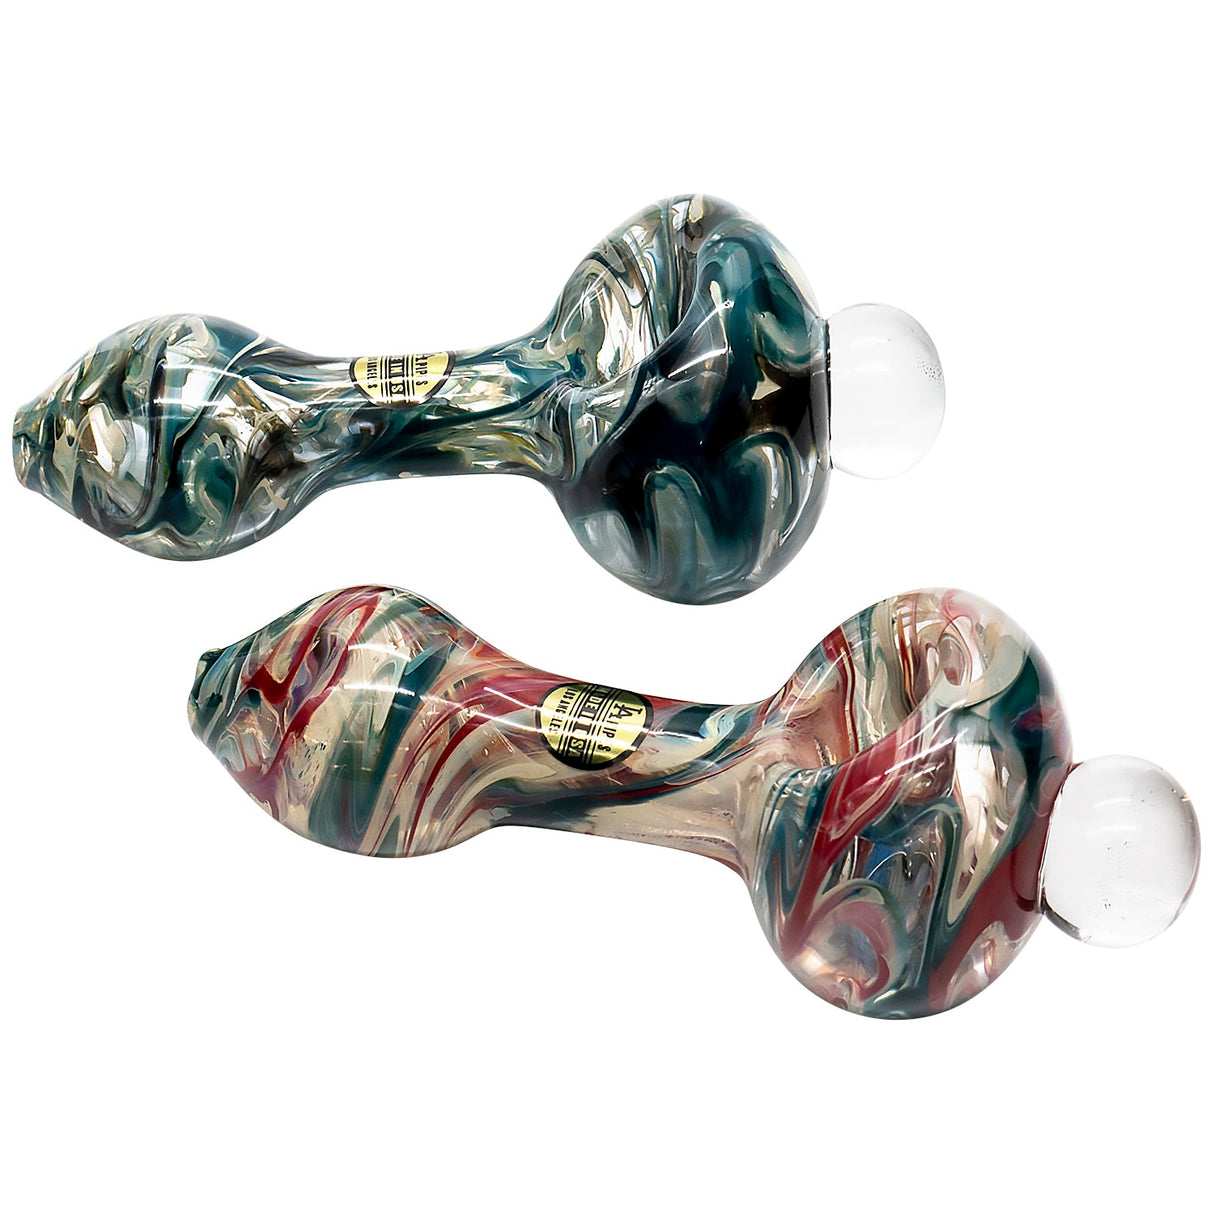 LA Pipes "Primordial Ooze" Glass Spoon Pipes with Fumed Color Changing Design, Top View